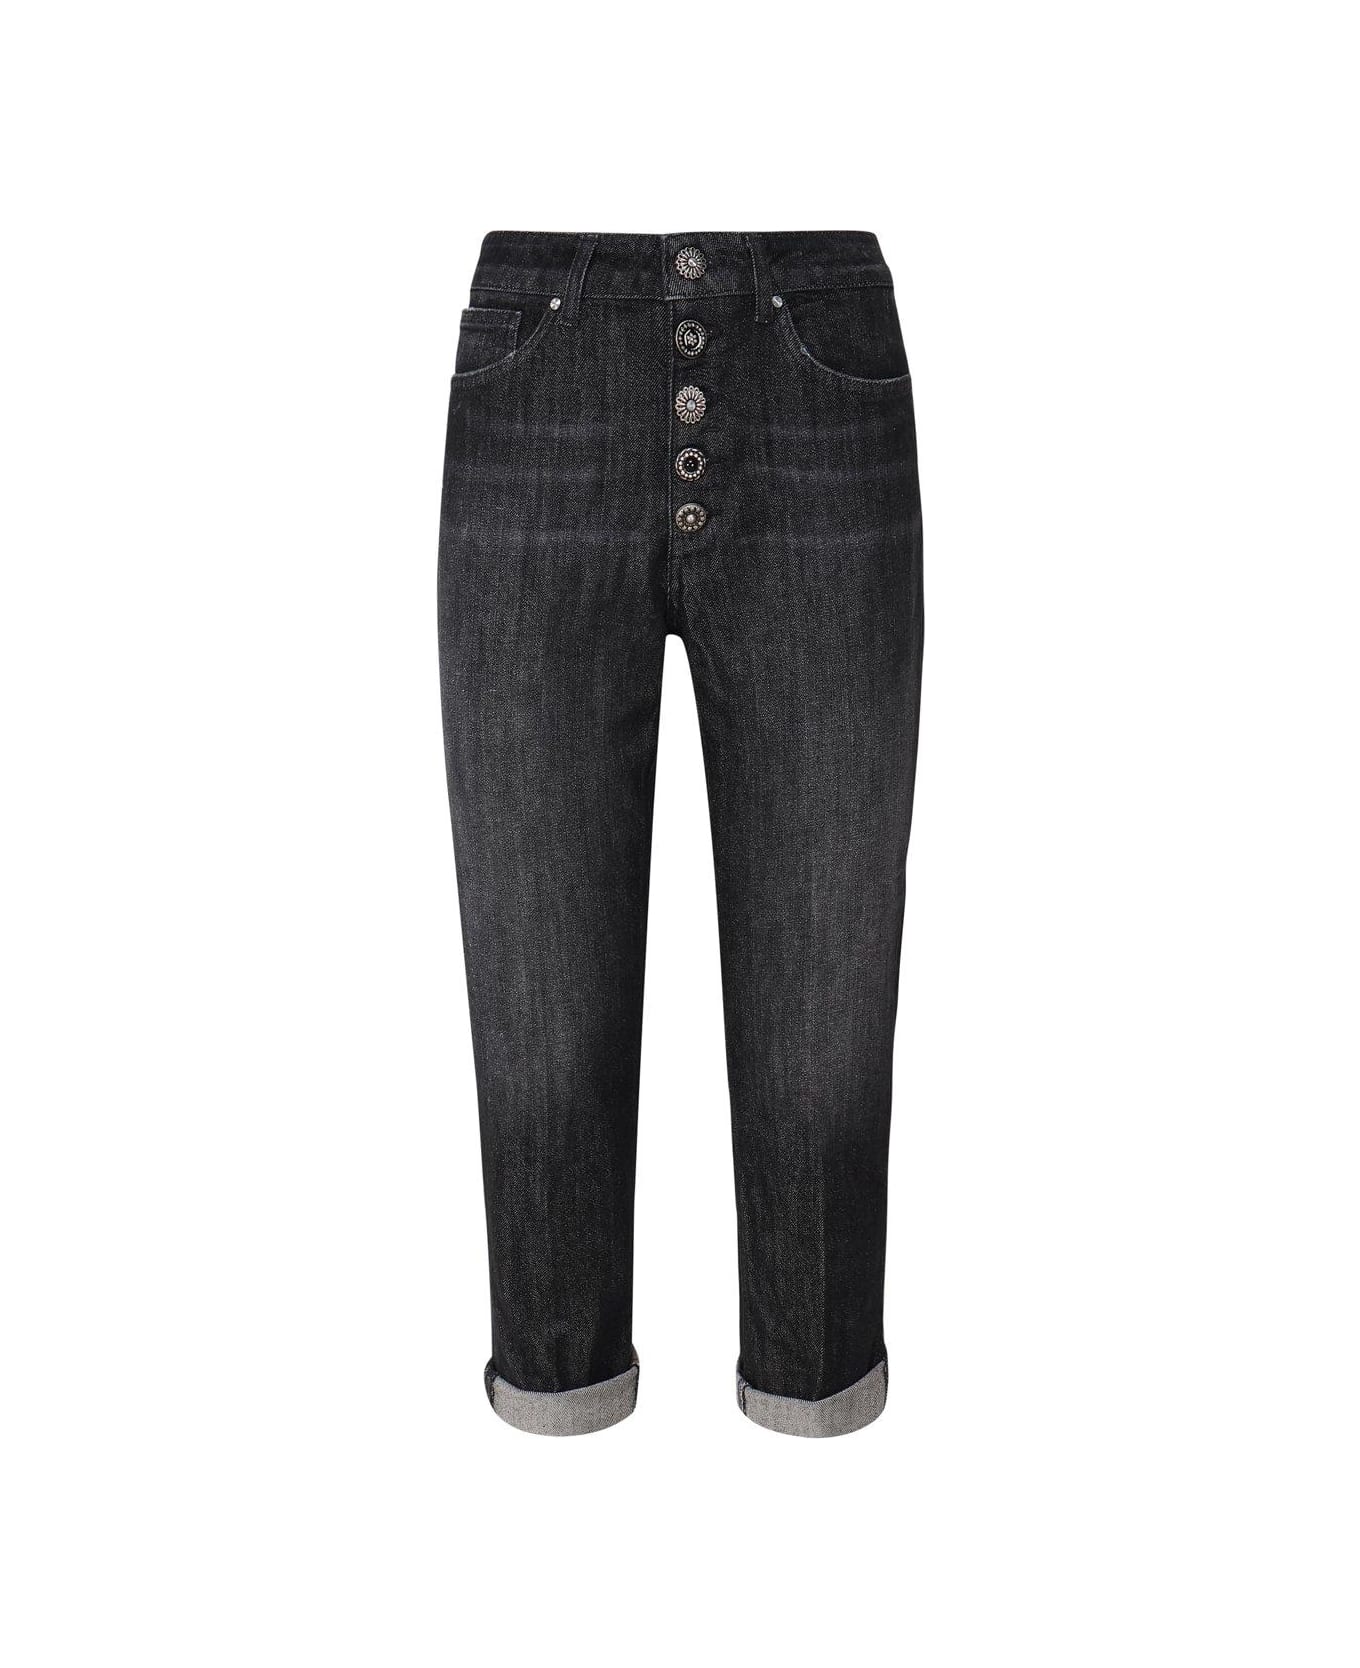 Dondup Black High-waisted Jeans - nero